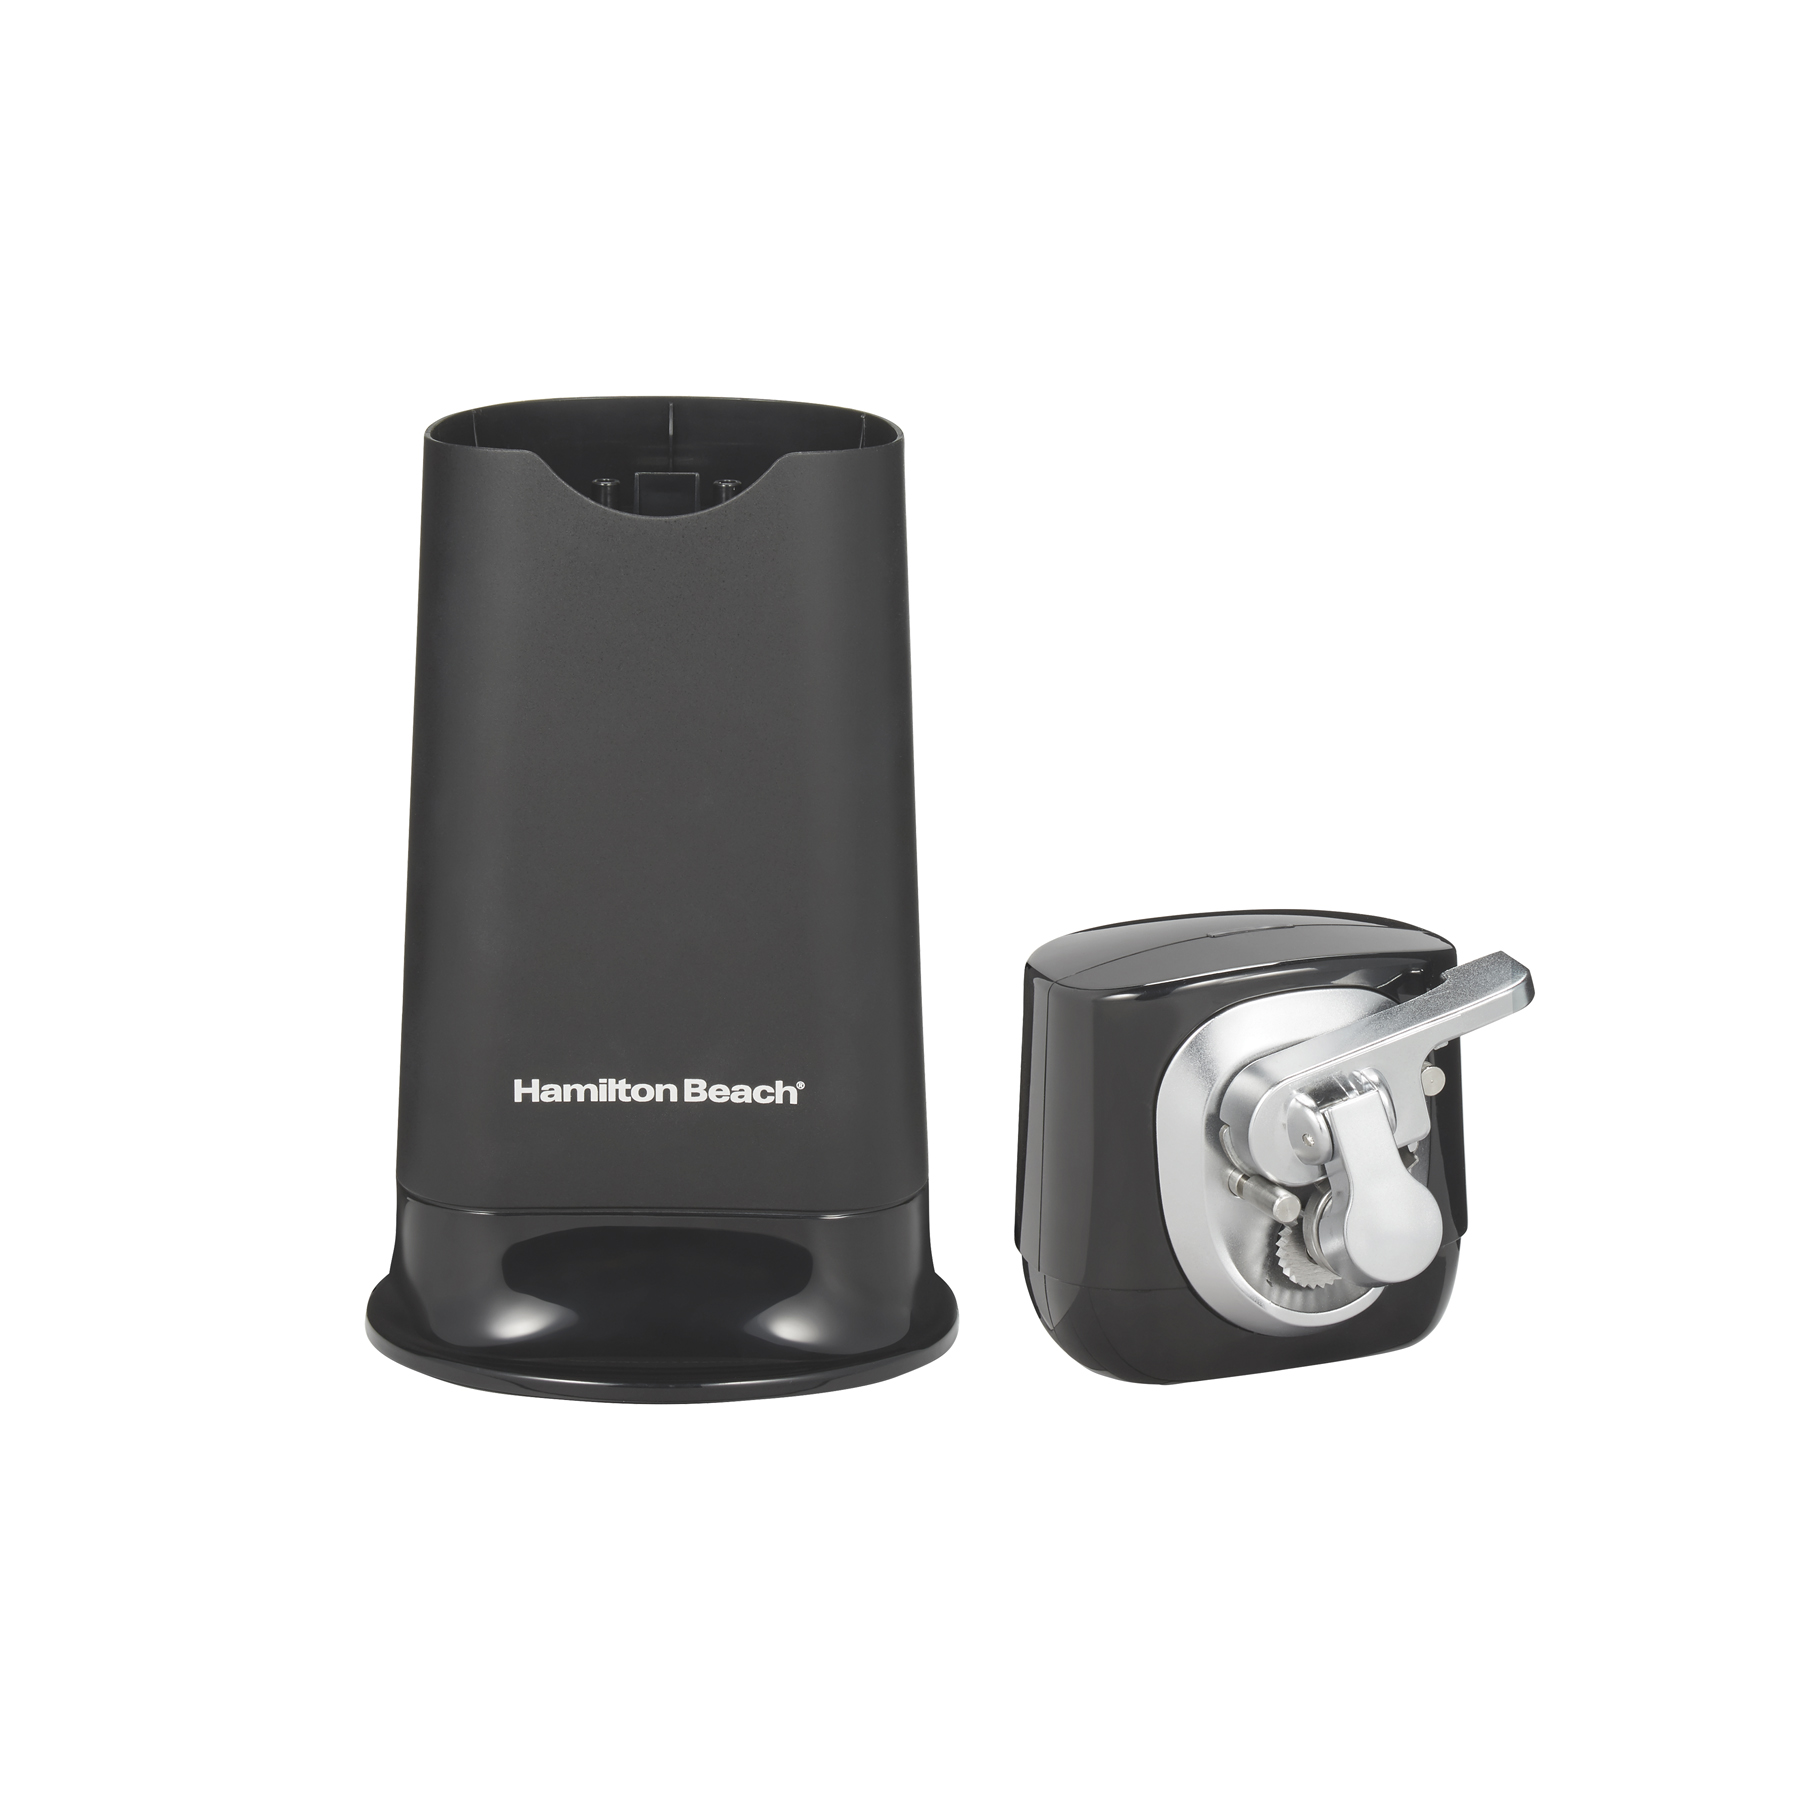 FlexCut™ Electric Can Opener, Cordless & Rechargeable - 76611